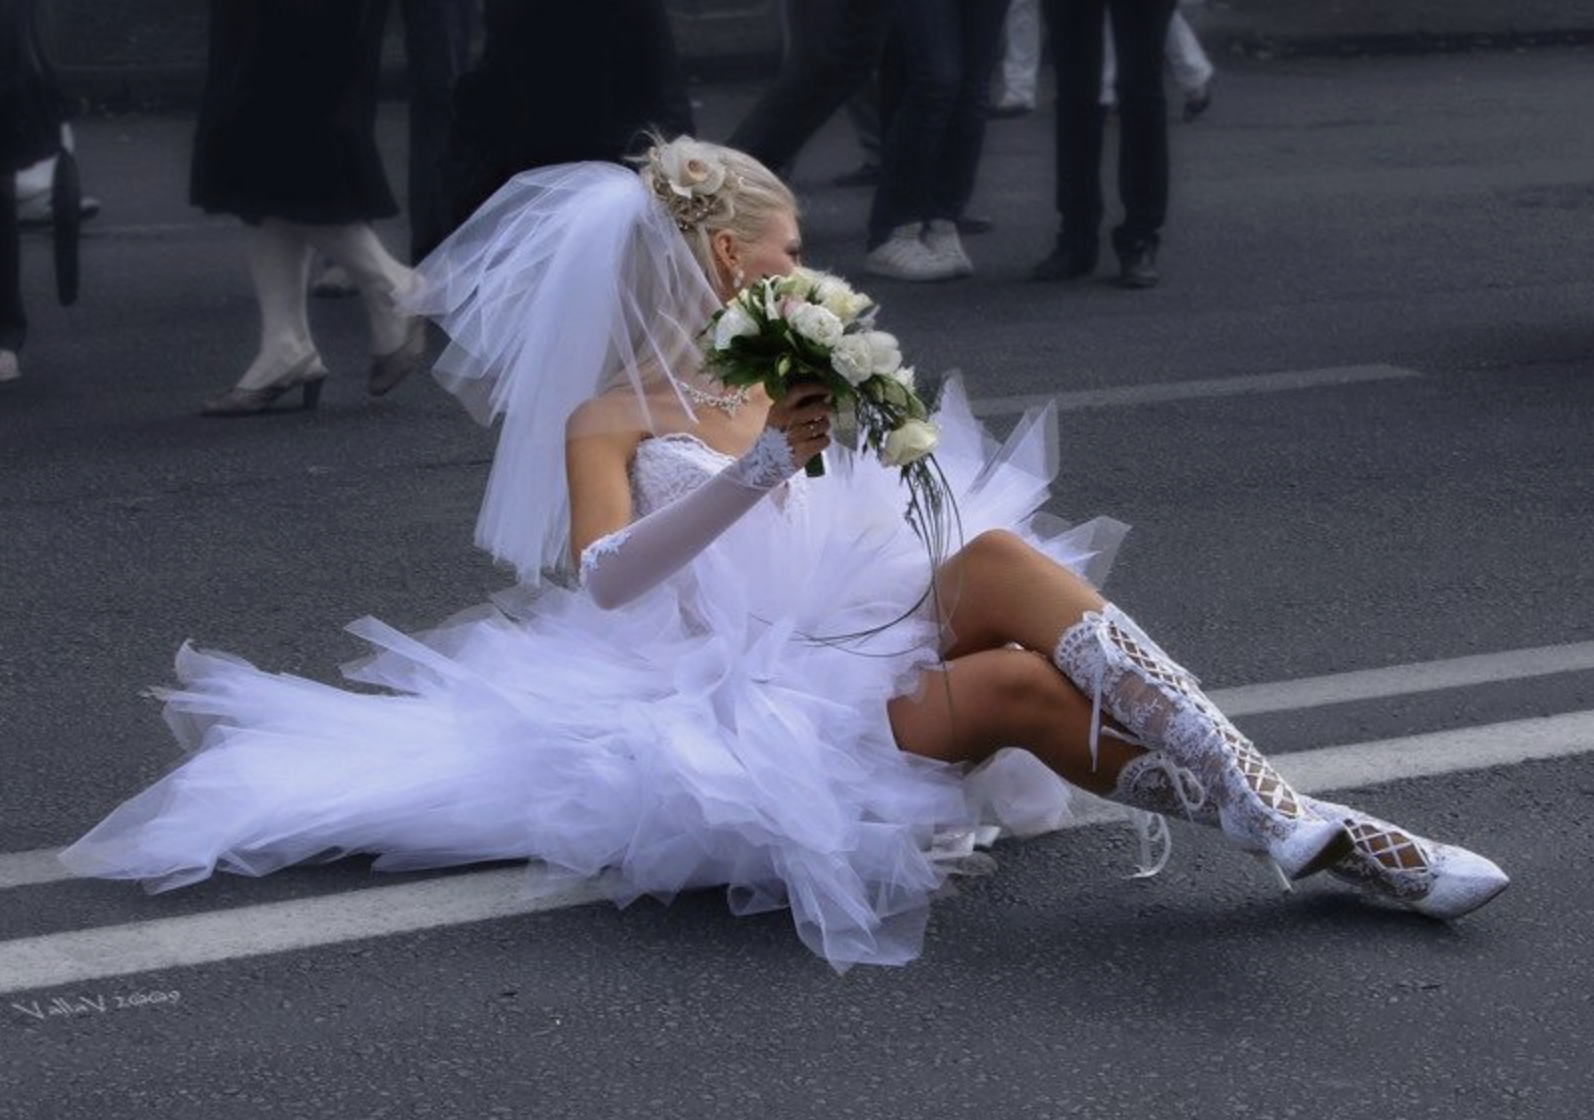 Bride is sitting on the road | Source: Shutterstock